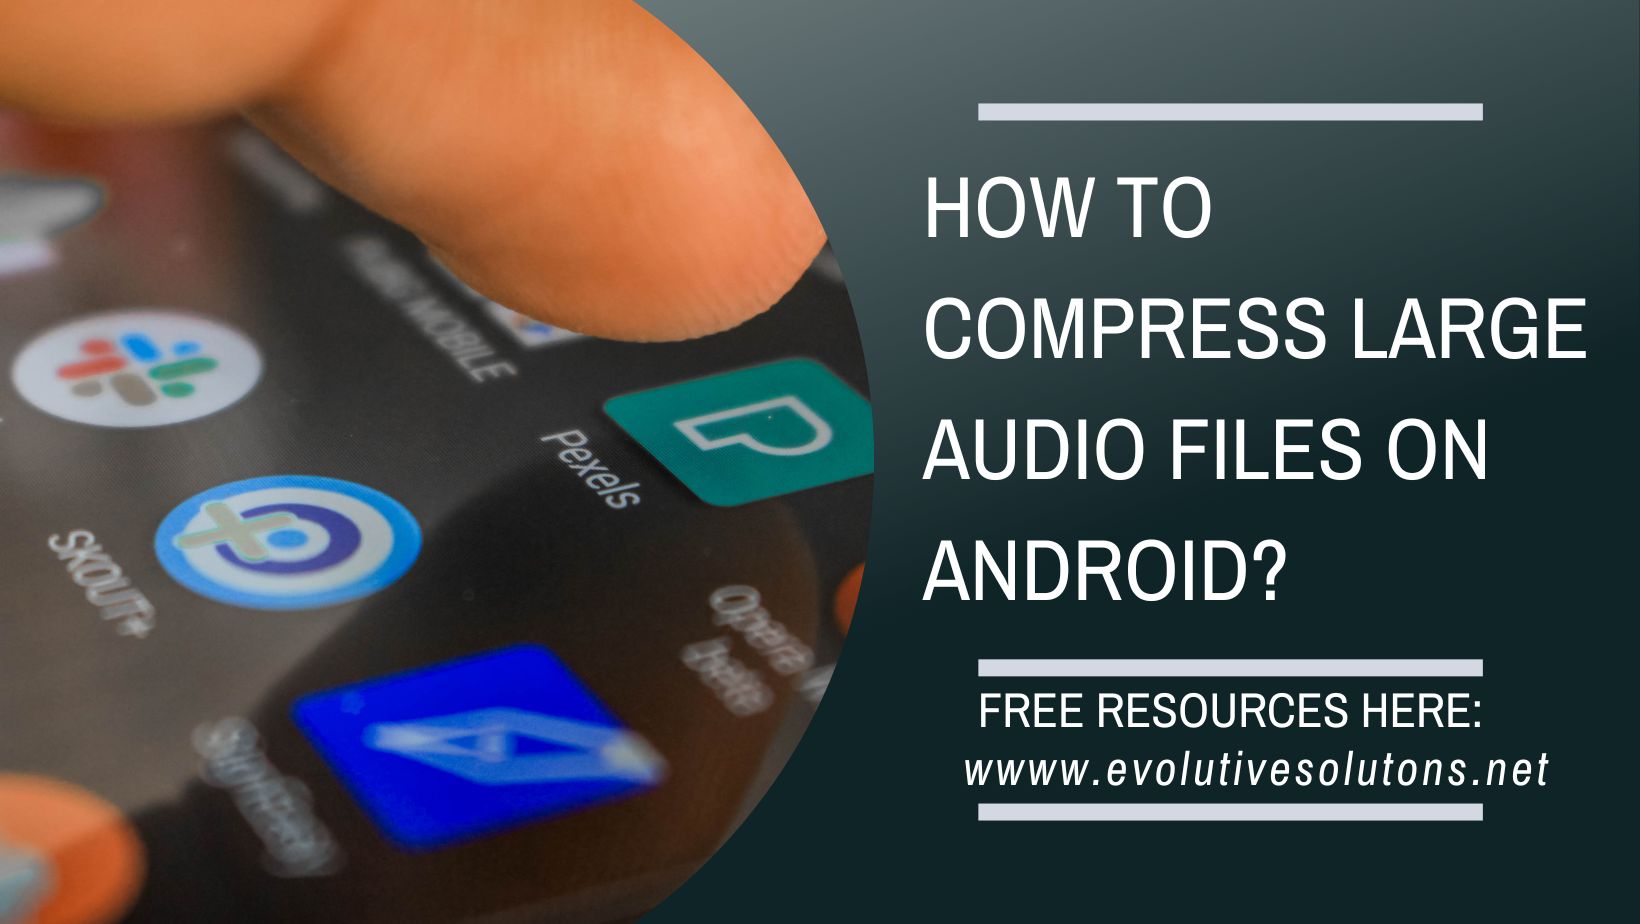 How to Compress Large Audio Files on Android?